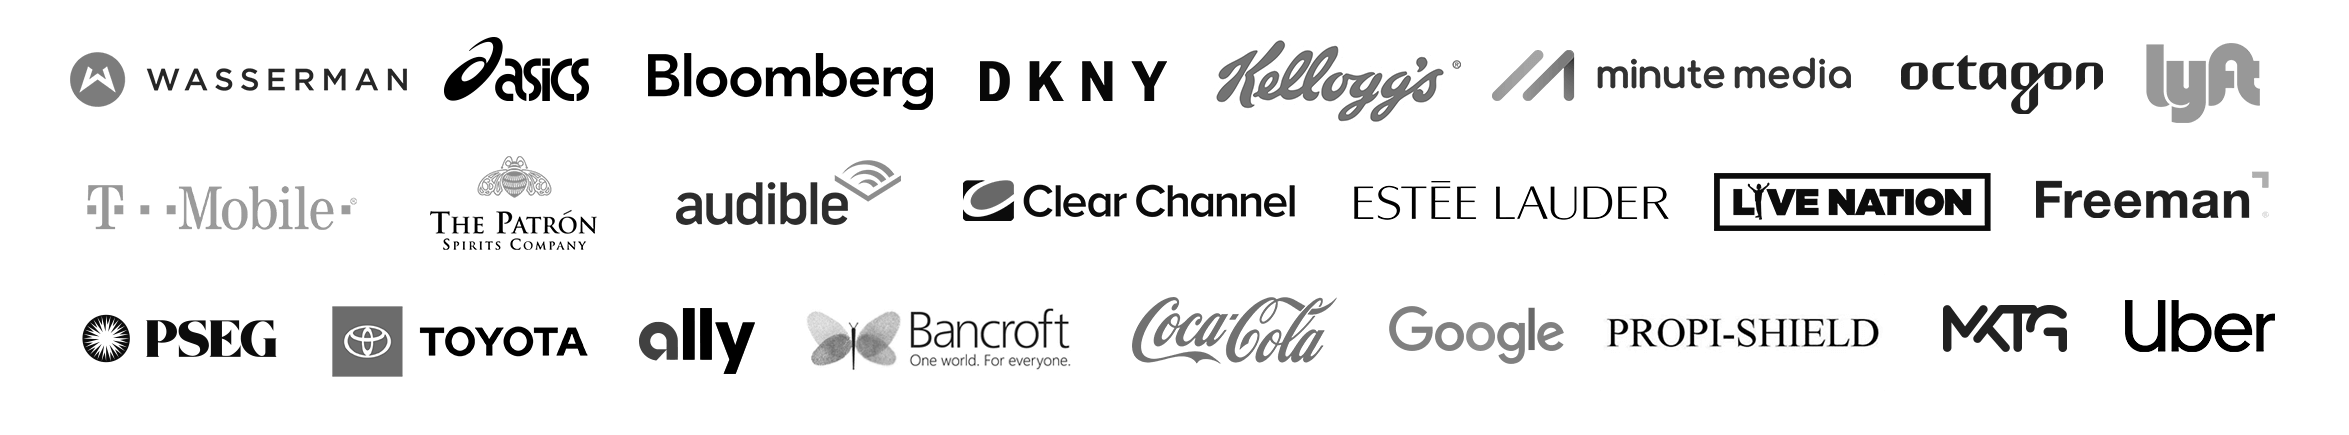 client logos incharged BW 1